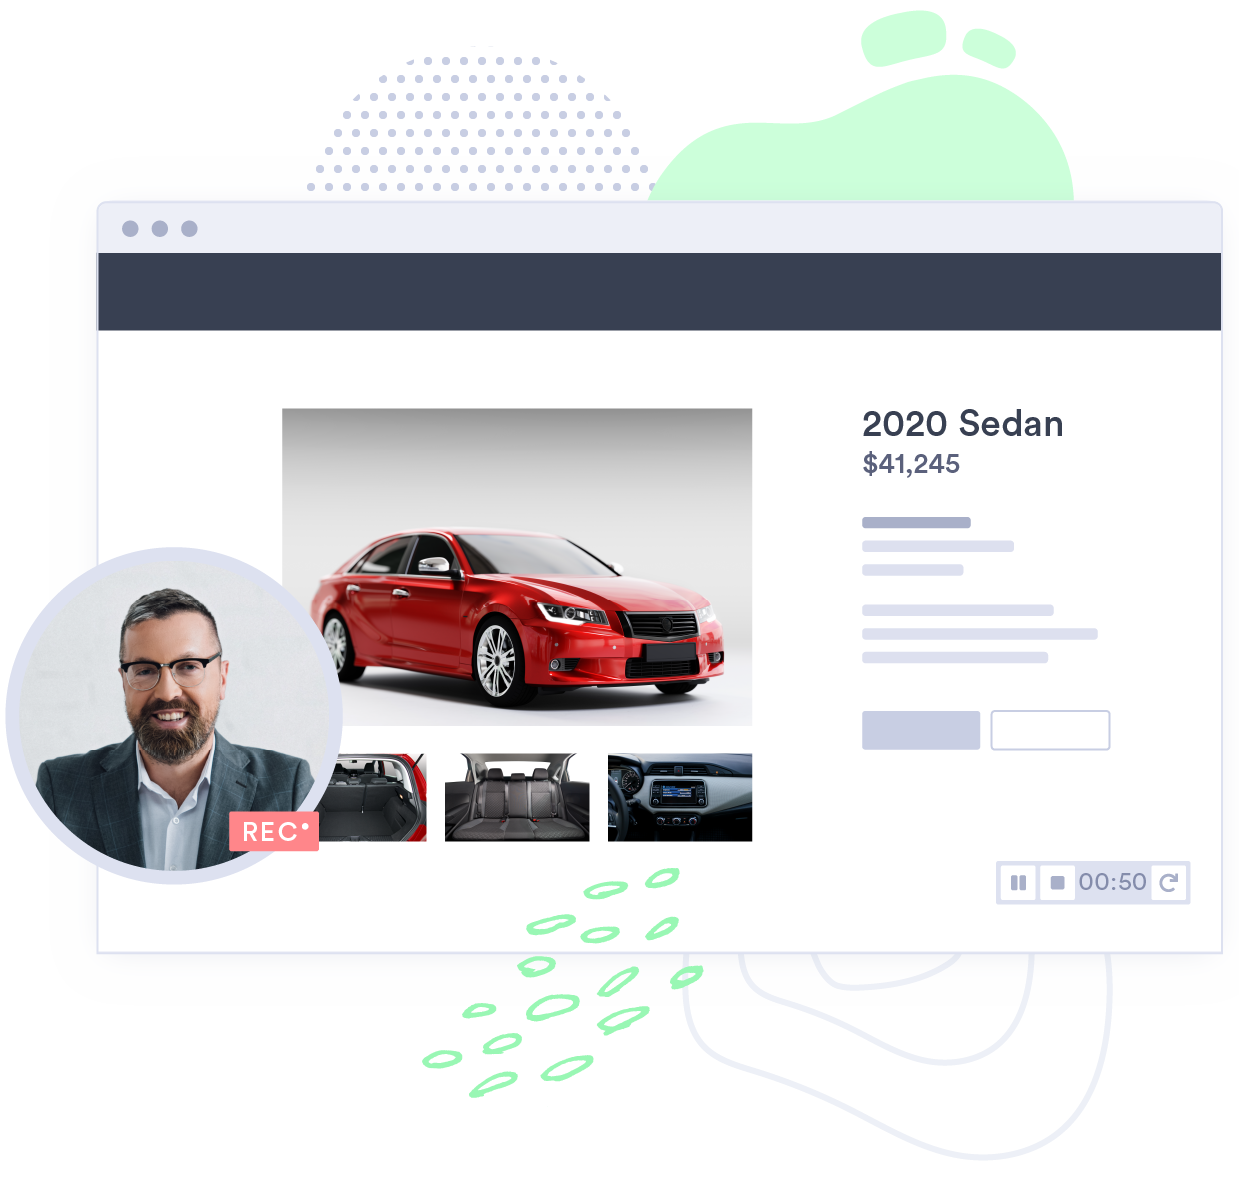 A salesman shares vehicle listings with a client through a personalized video.